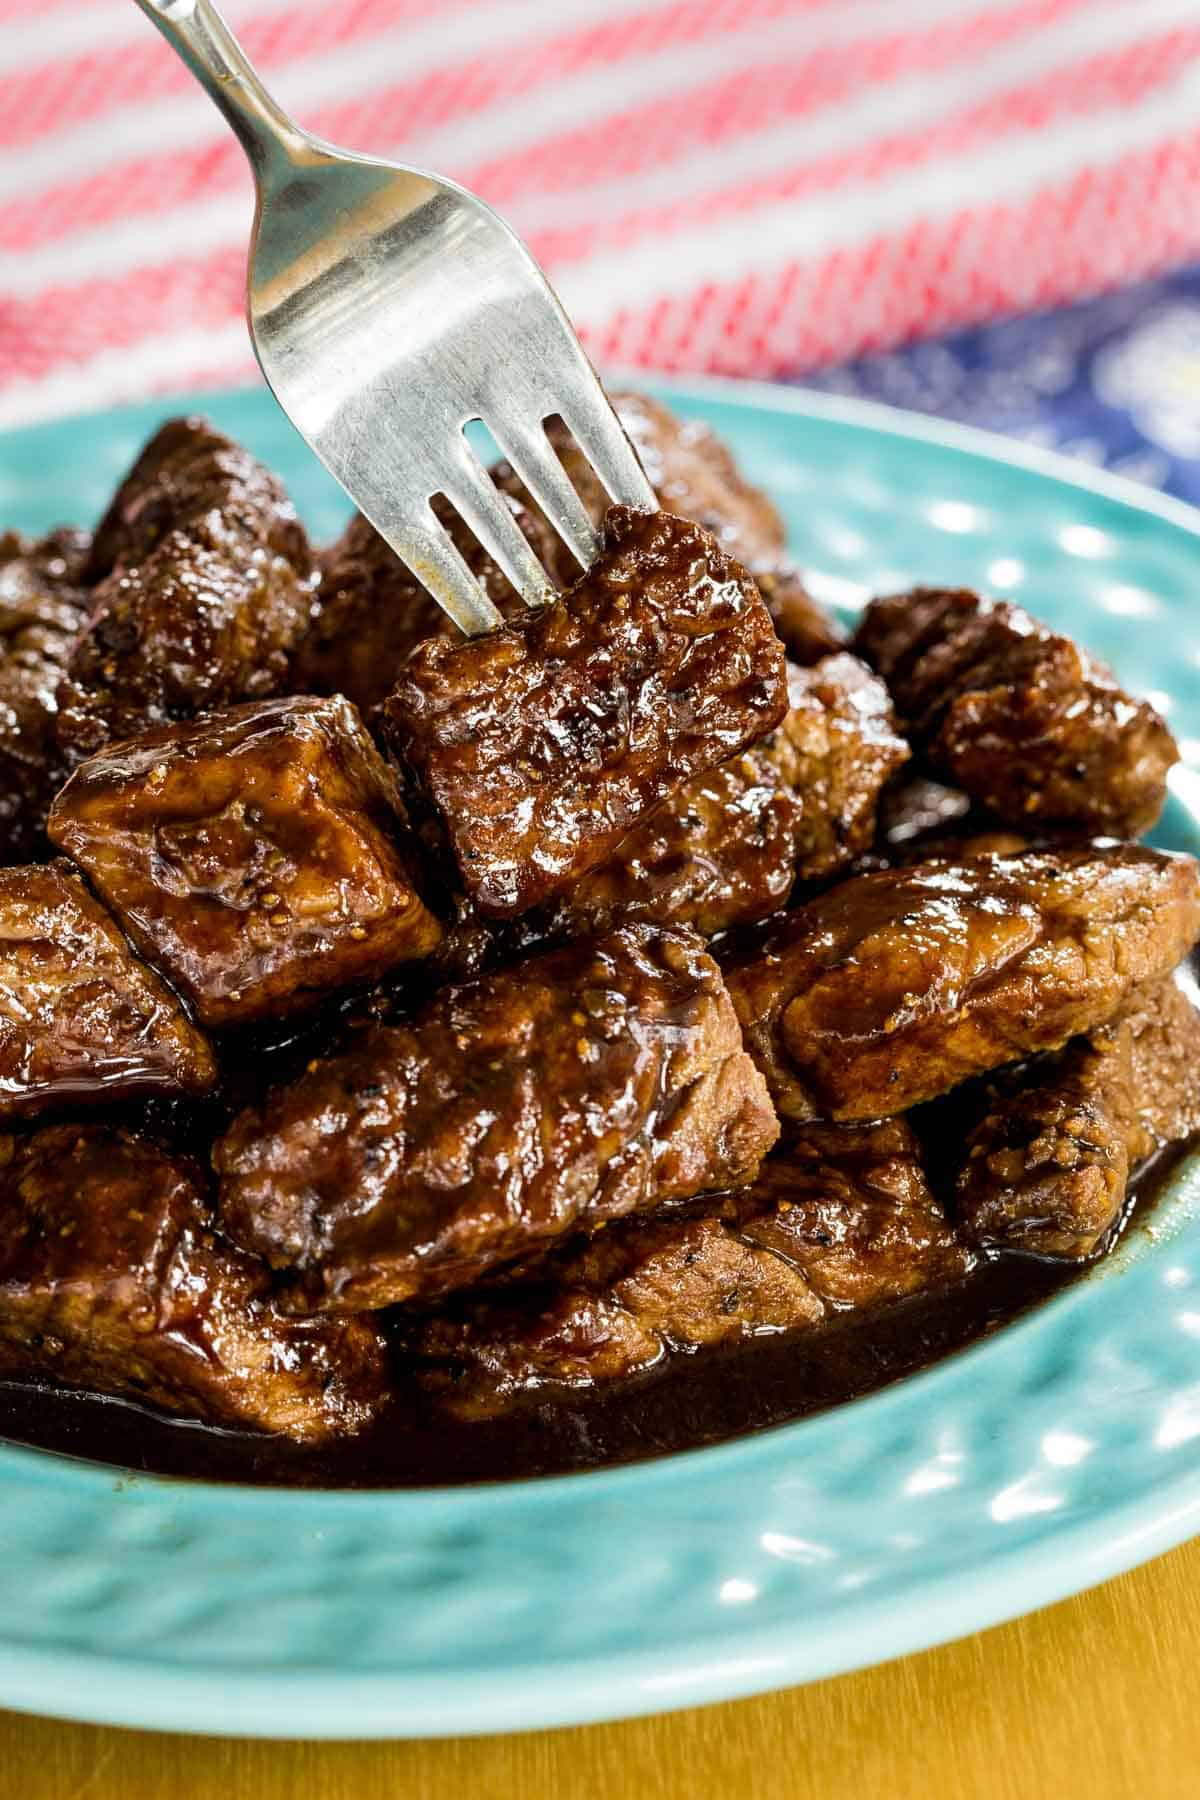 Honey Balsamic Glazed Steak Bites being picked up with a fork